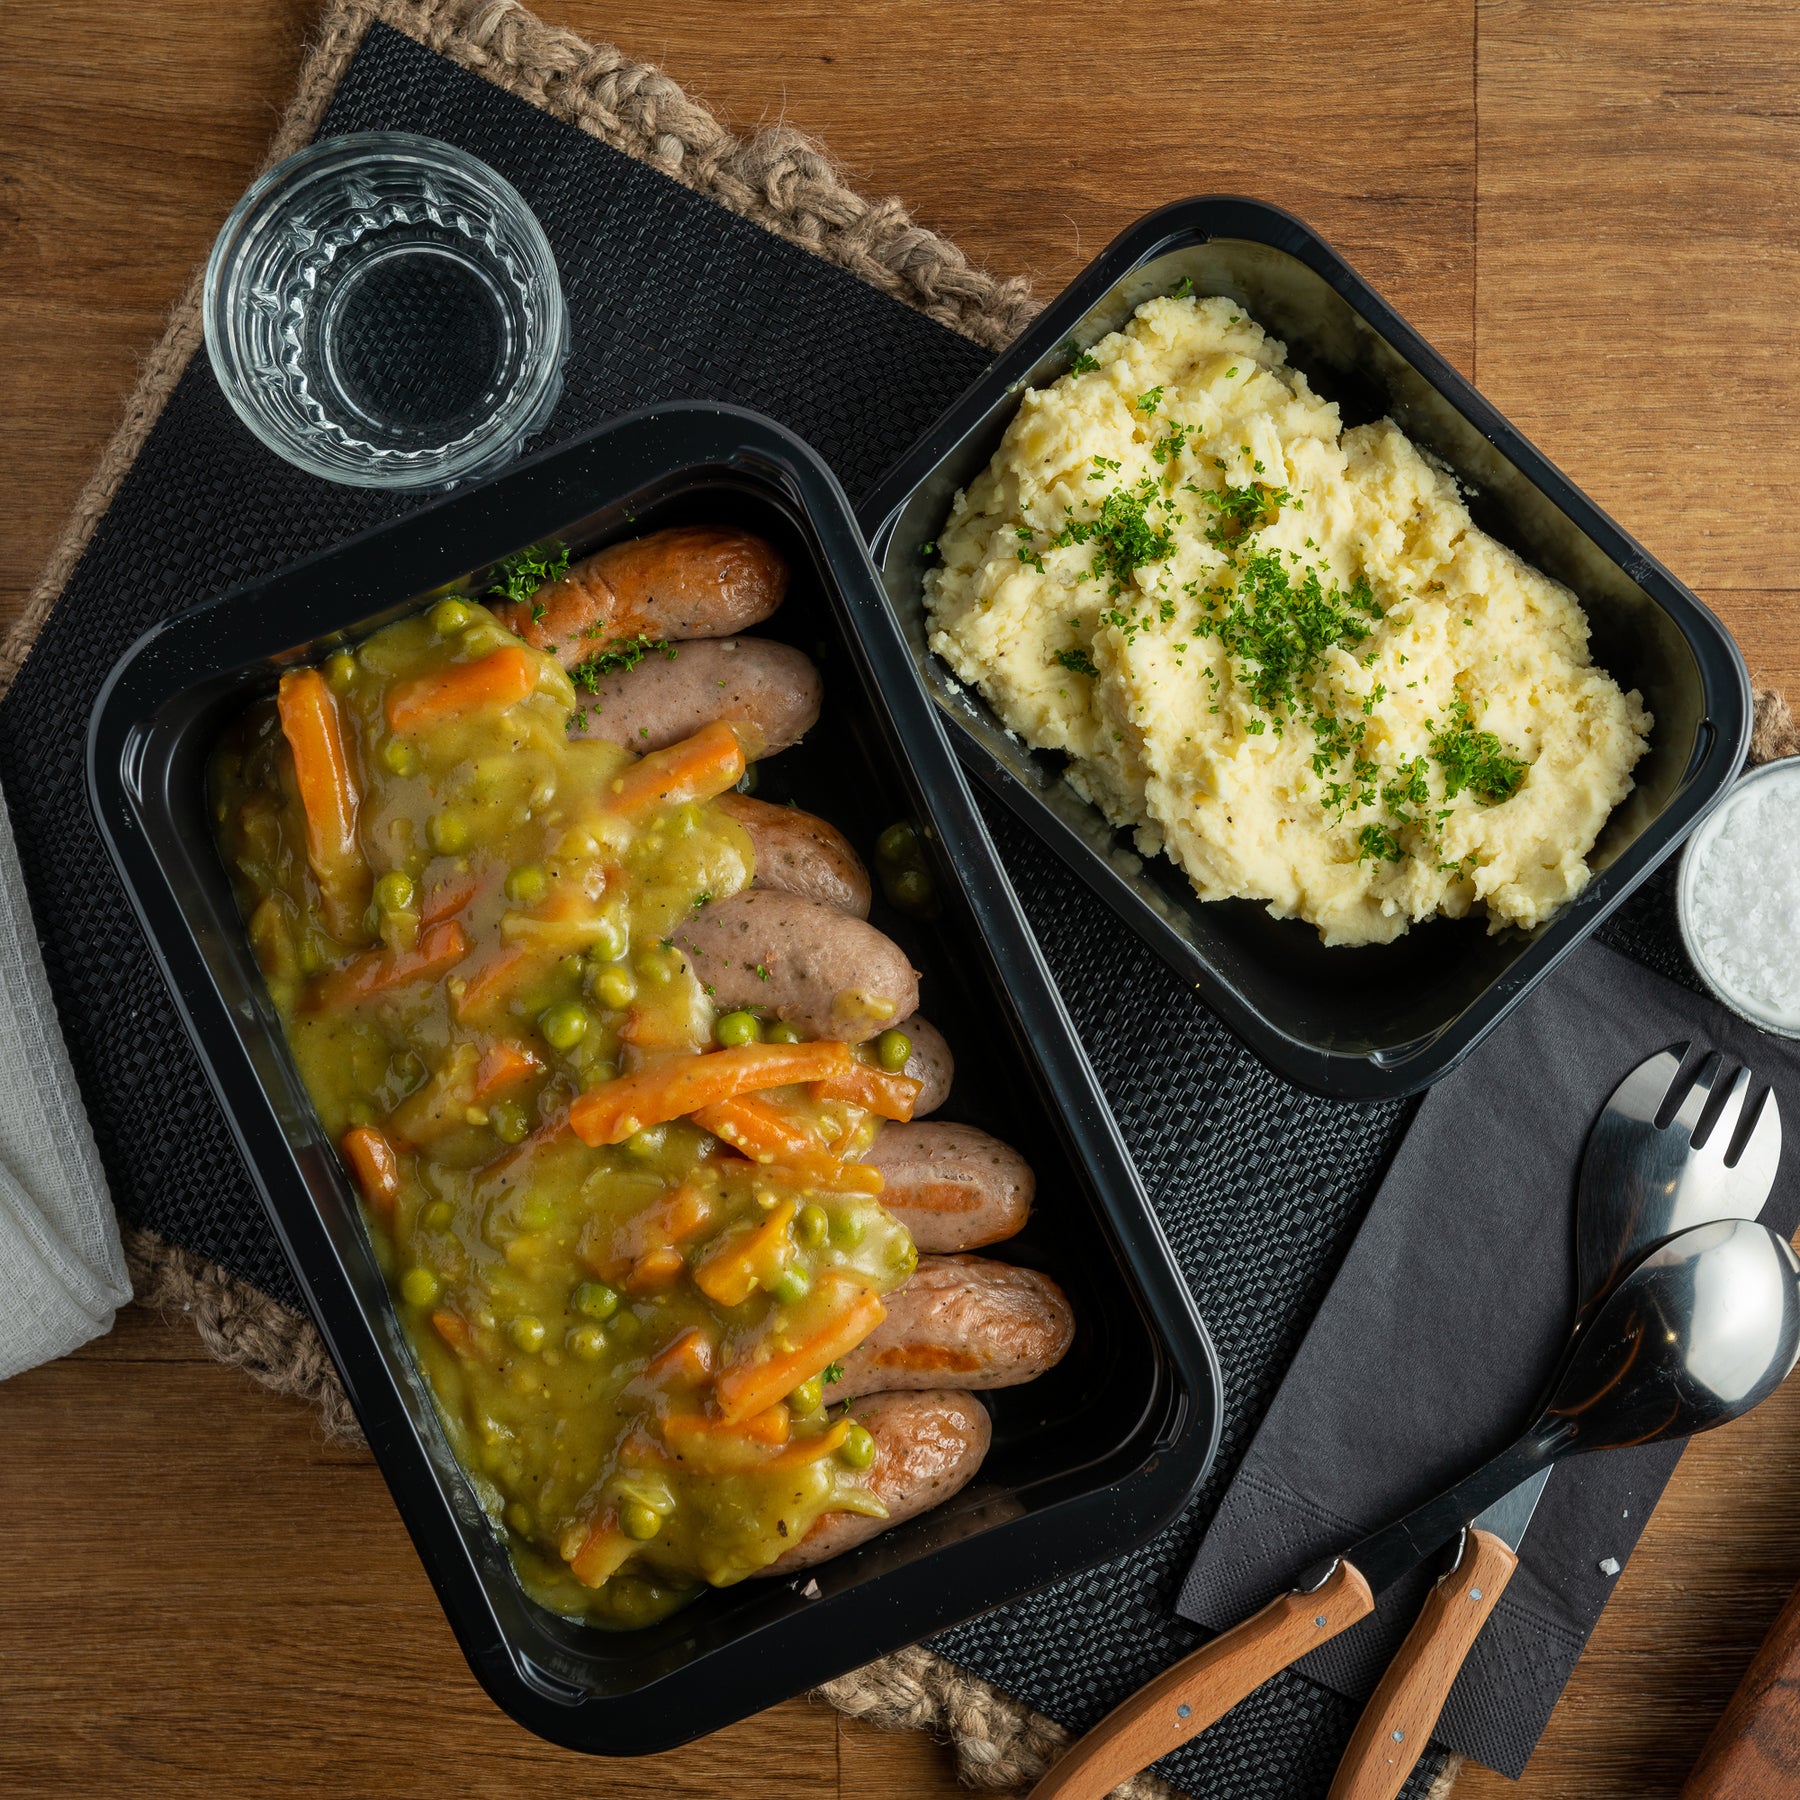 Curried sausages with a side of mustard mashed potatoes